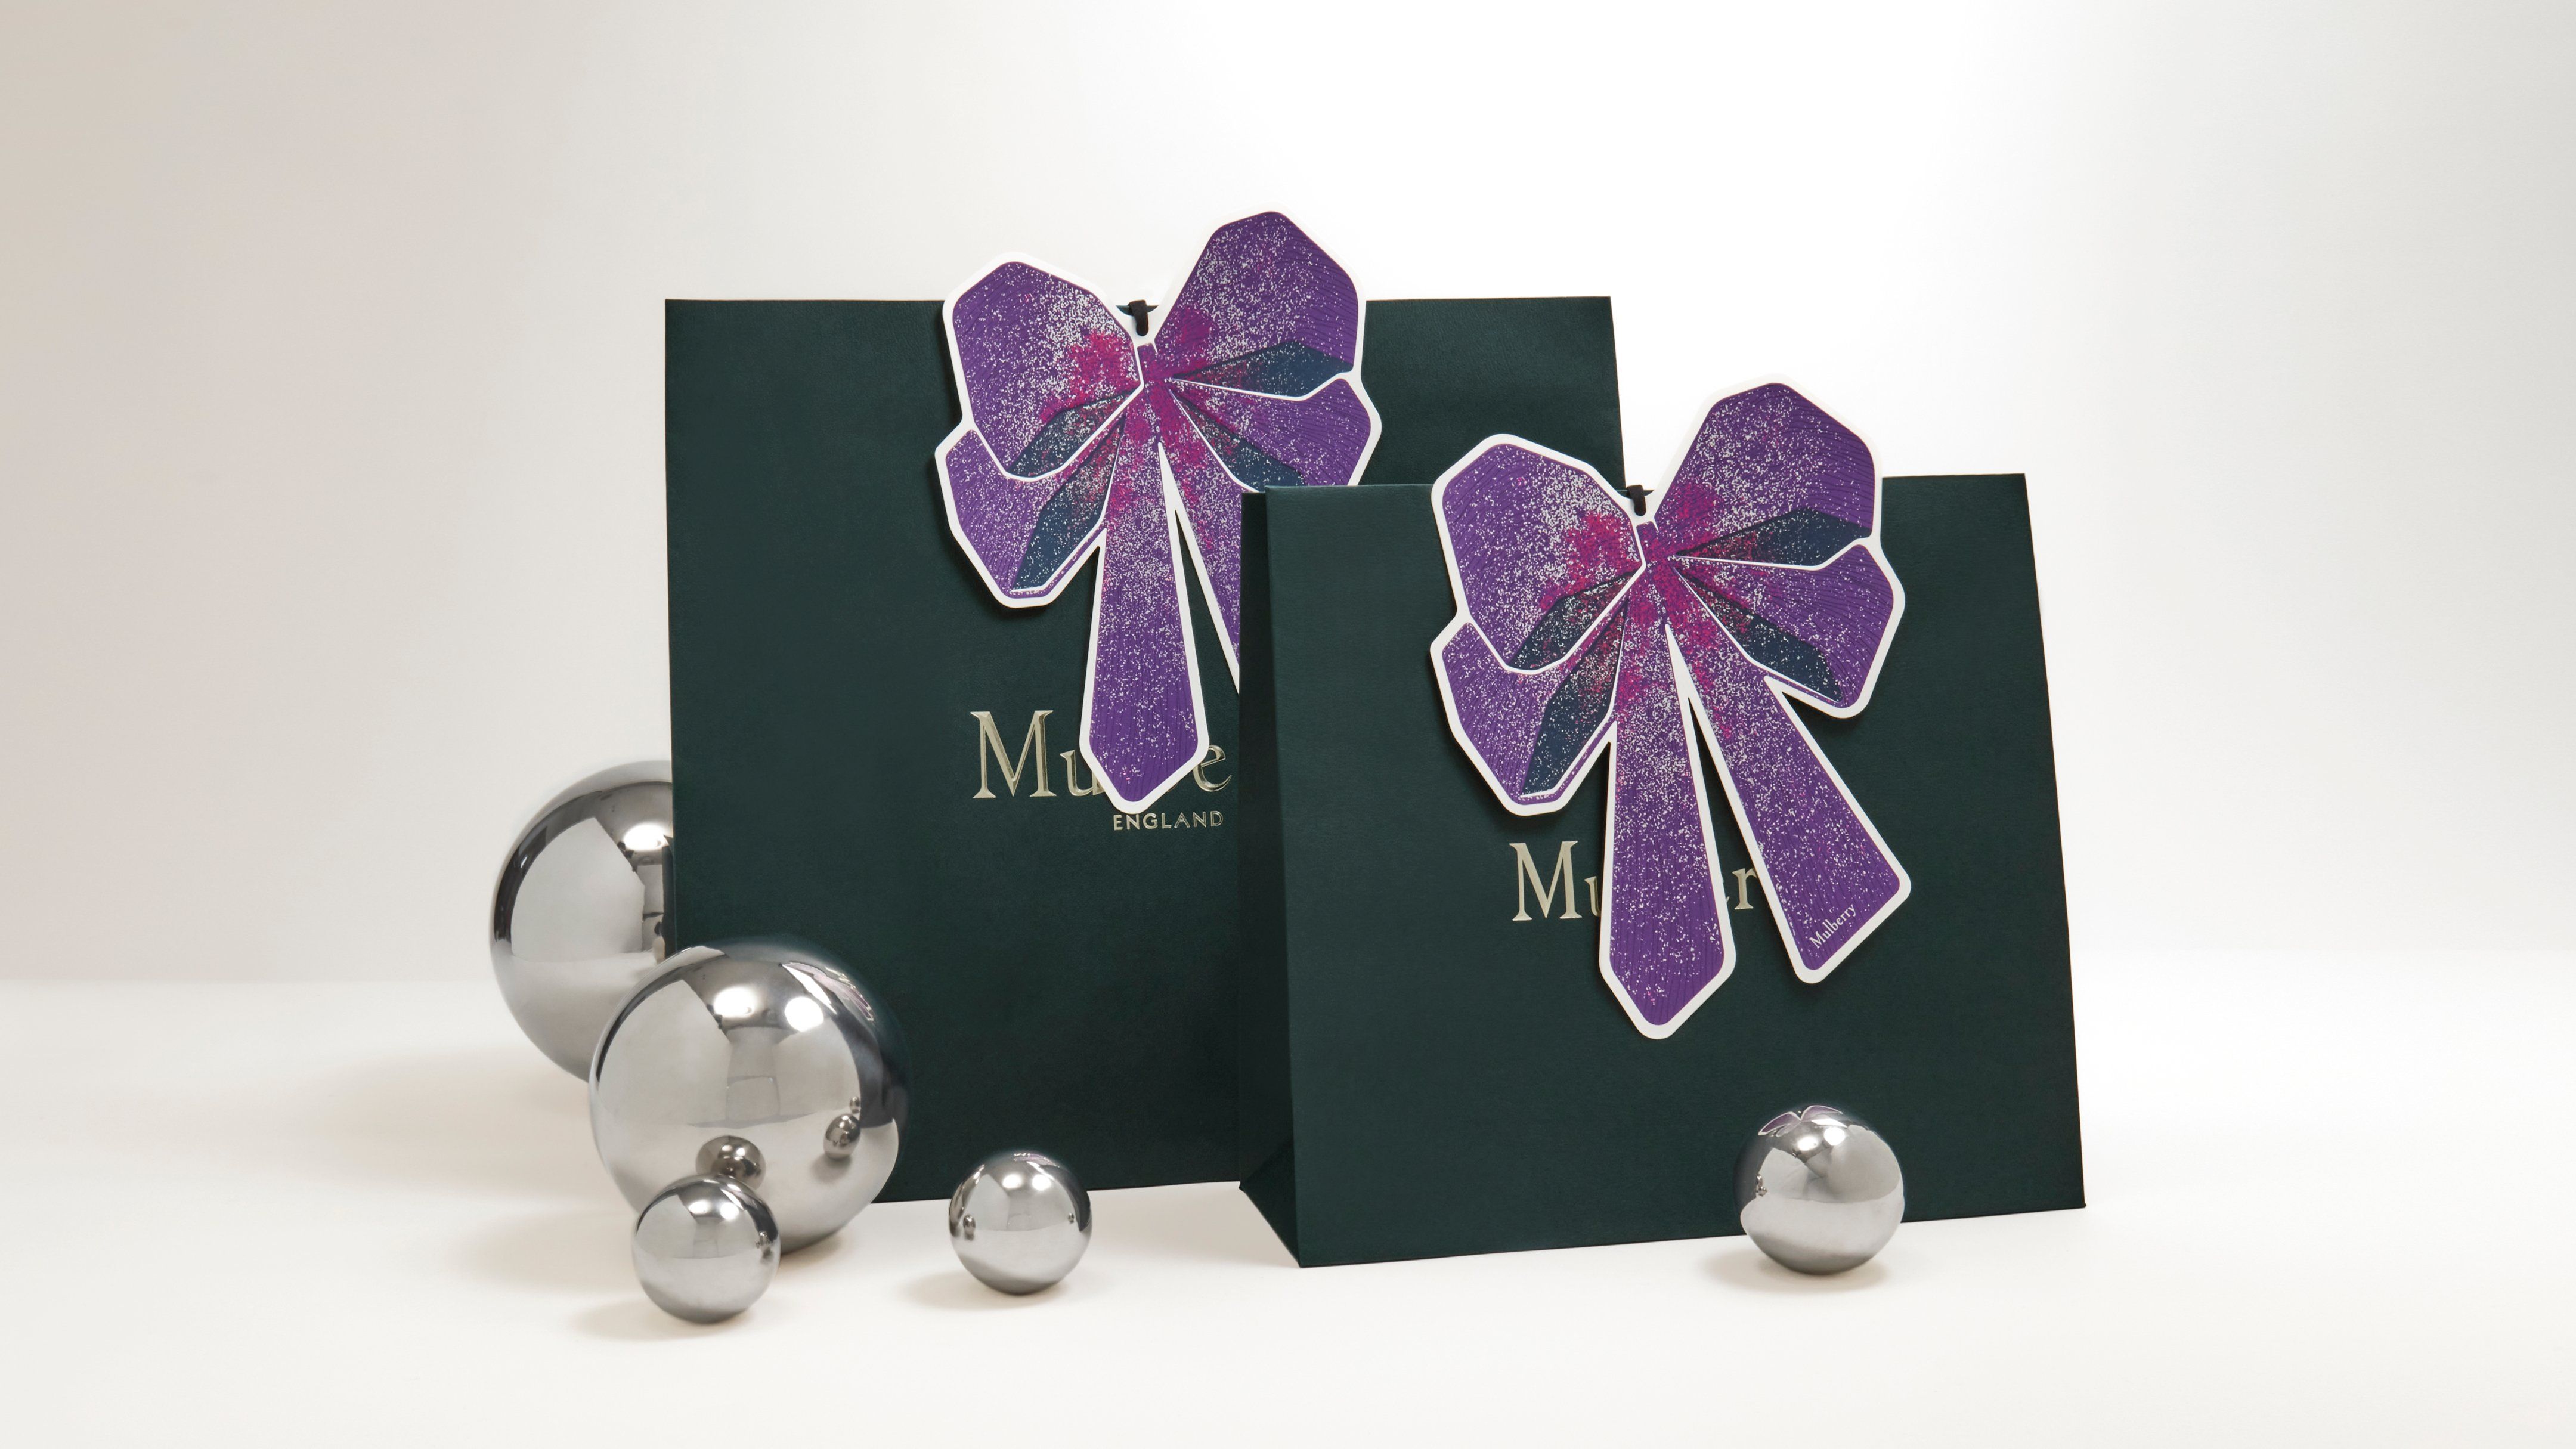 Mulberry packaging green bags with festive bows